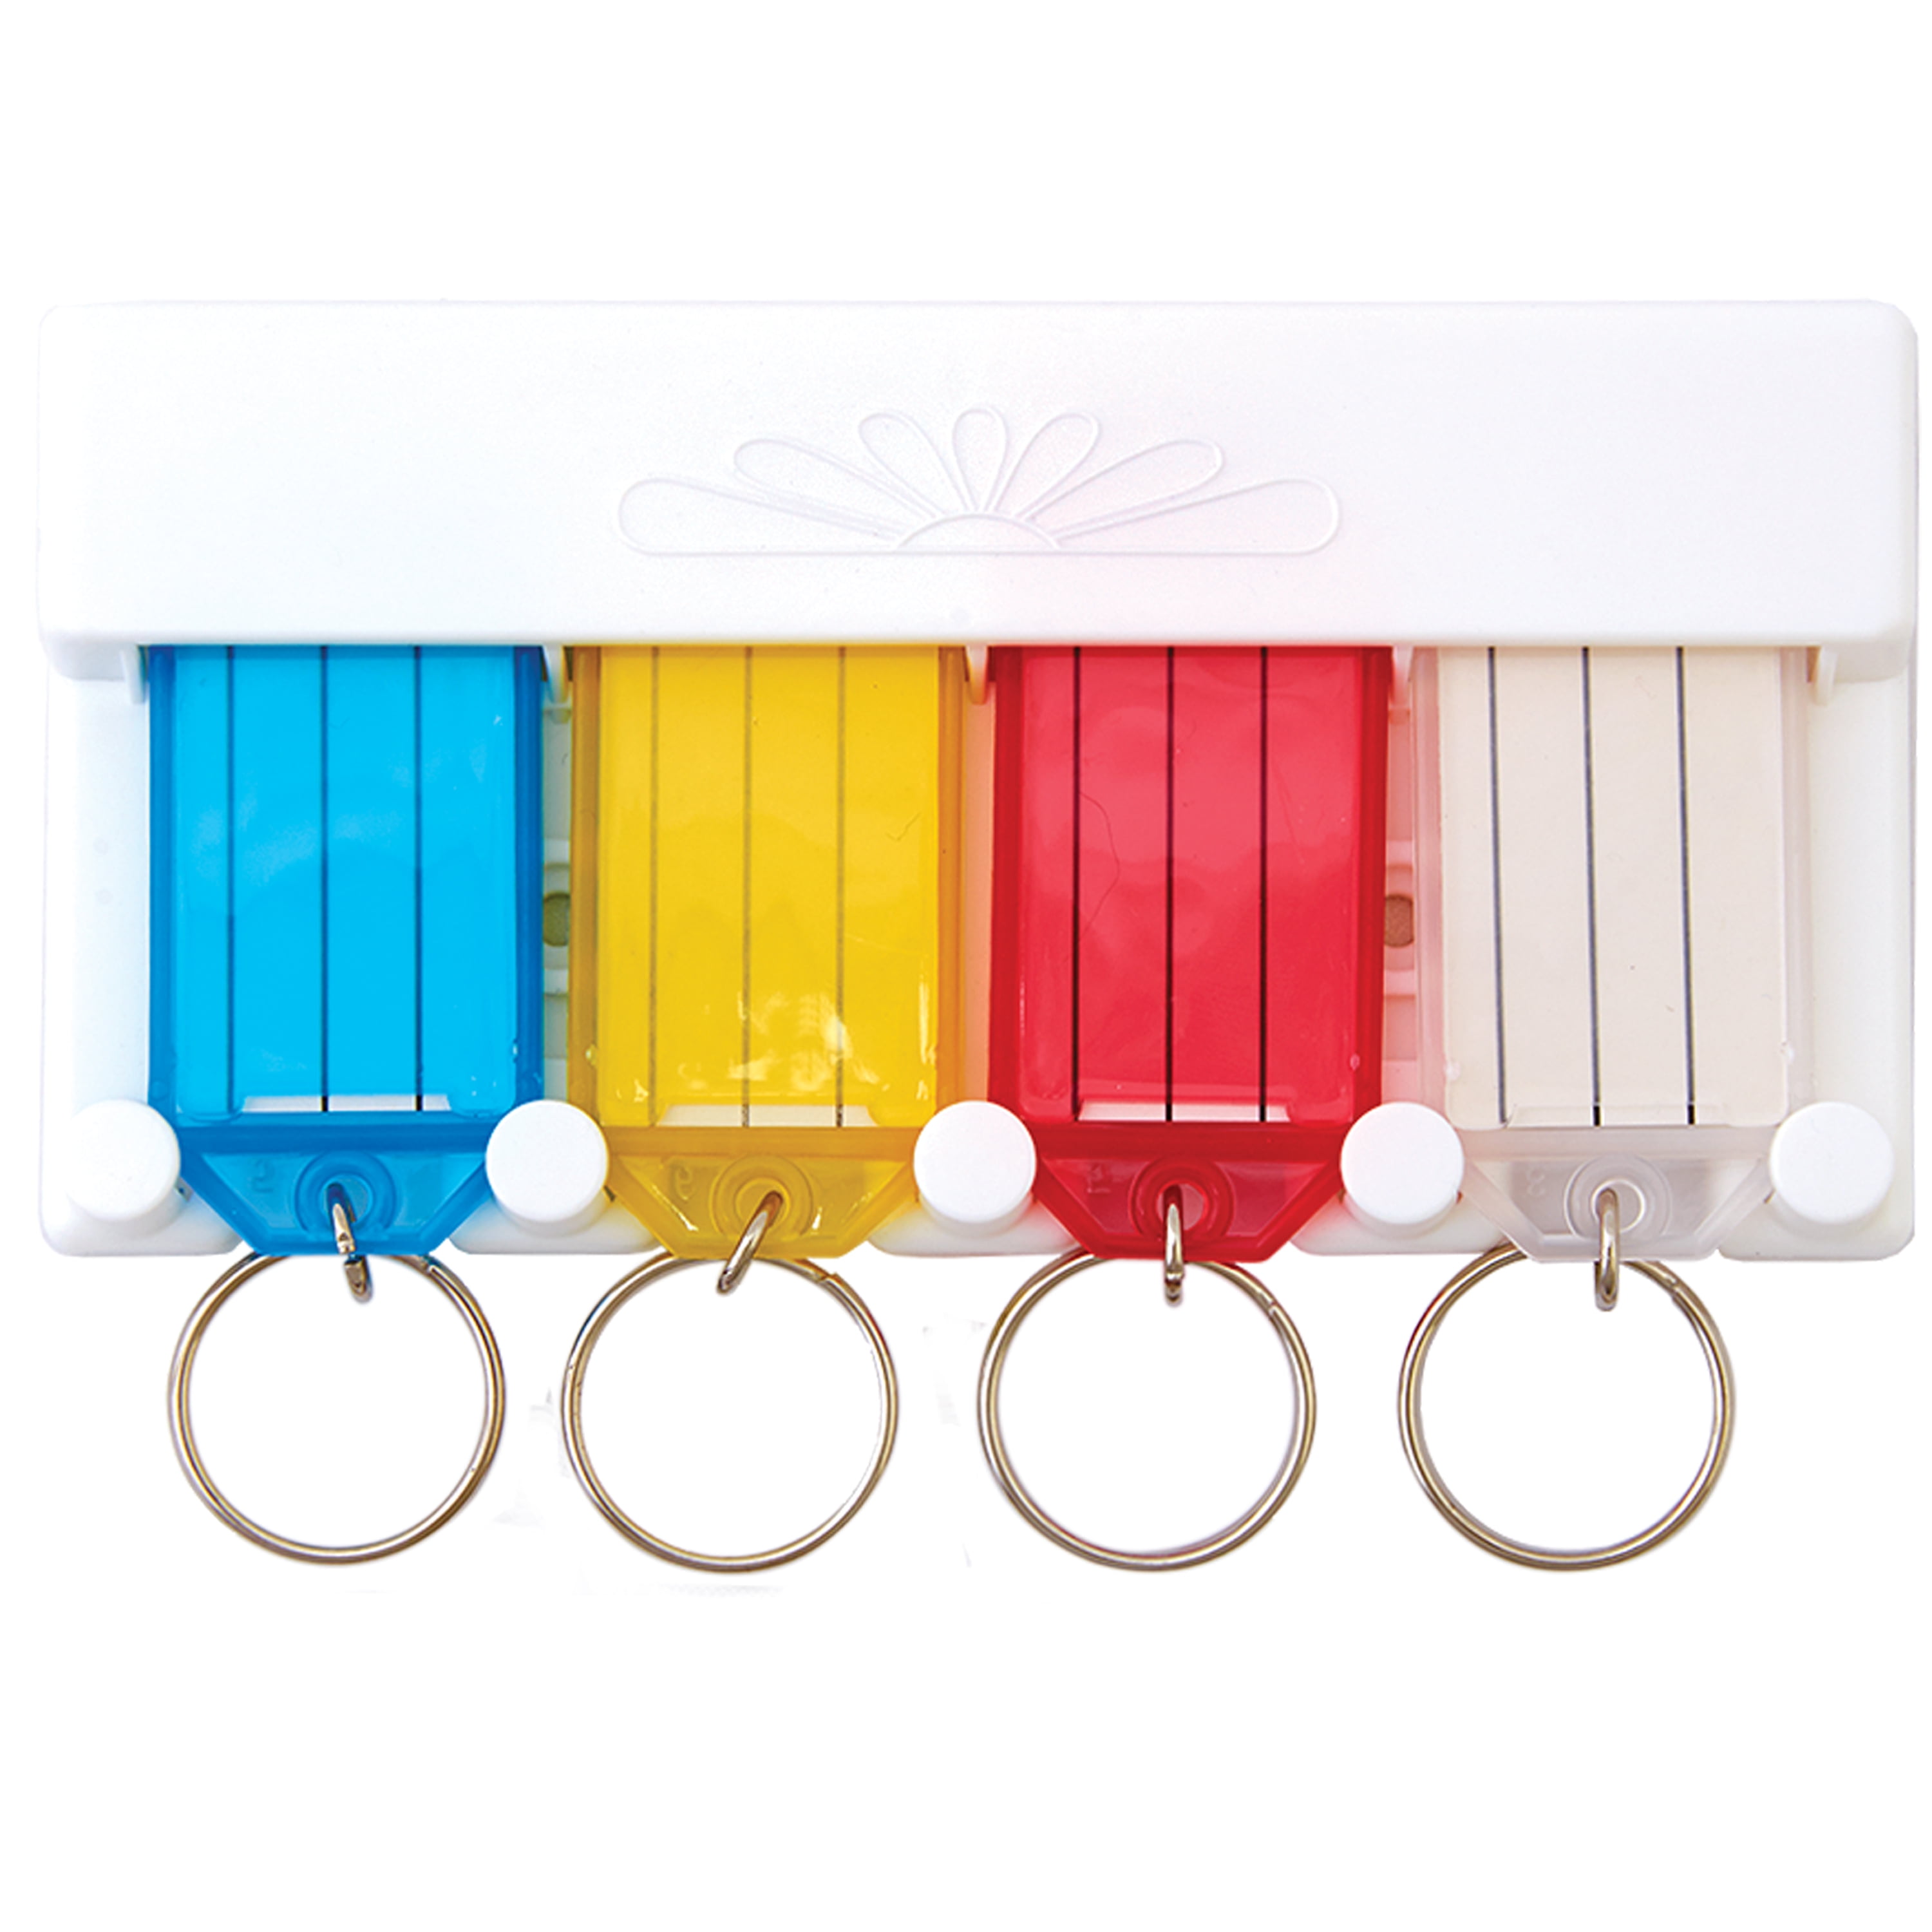 HY-KO 2GO Easy-Open Key Tags with Split Ring, 2 Count